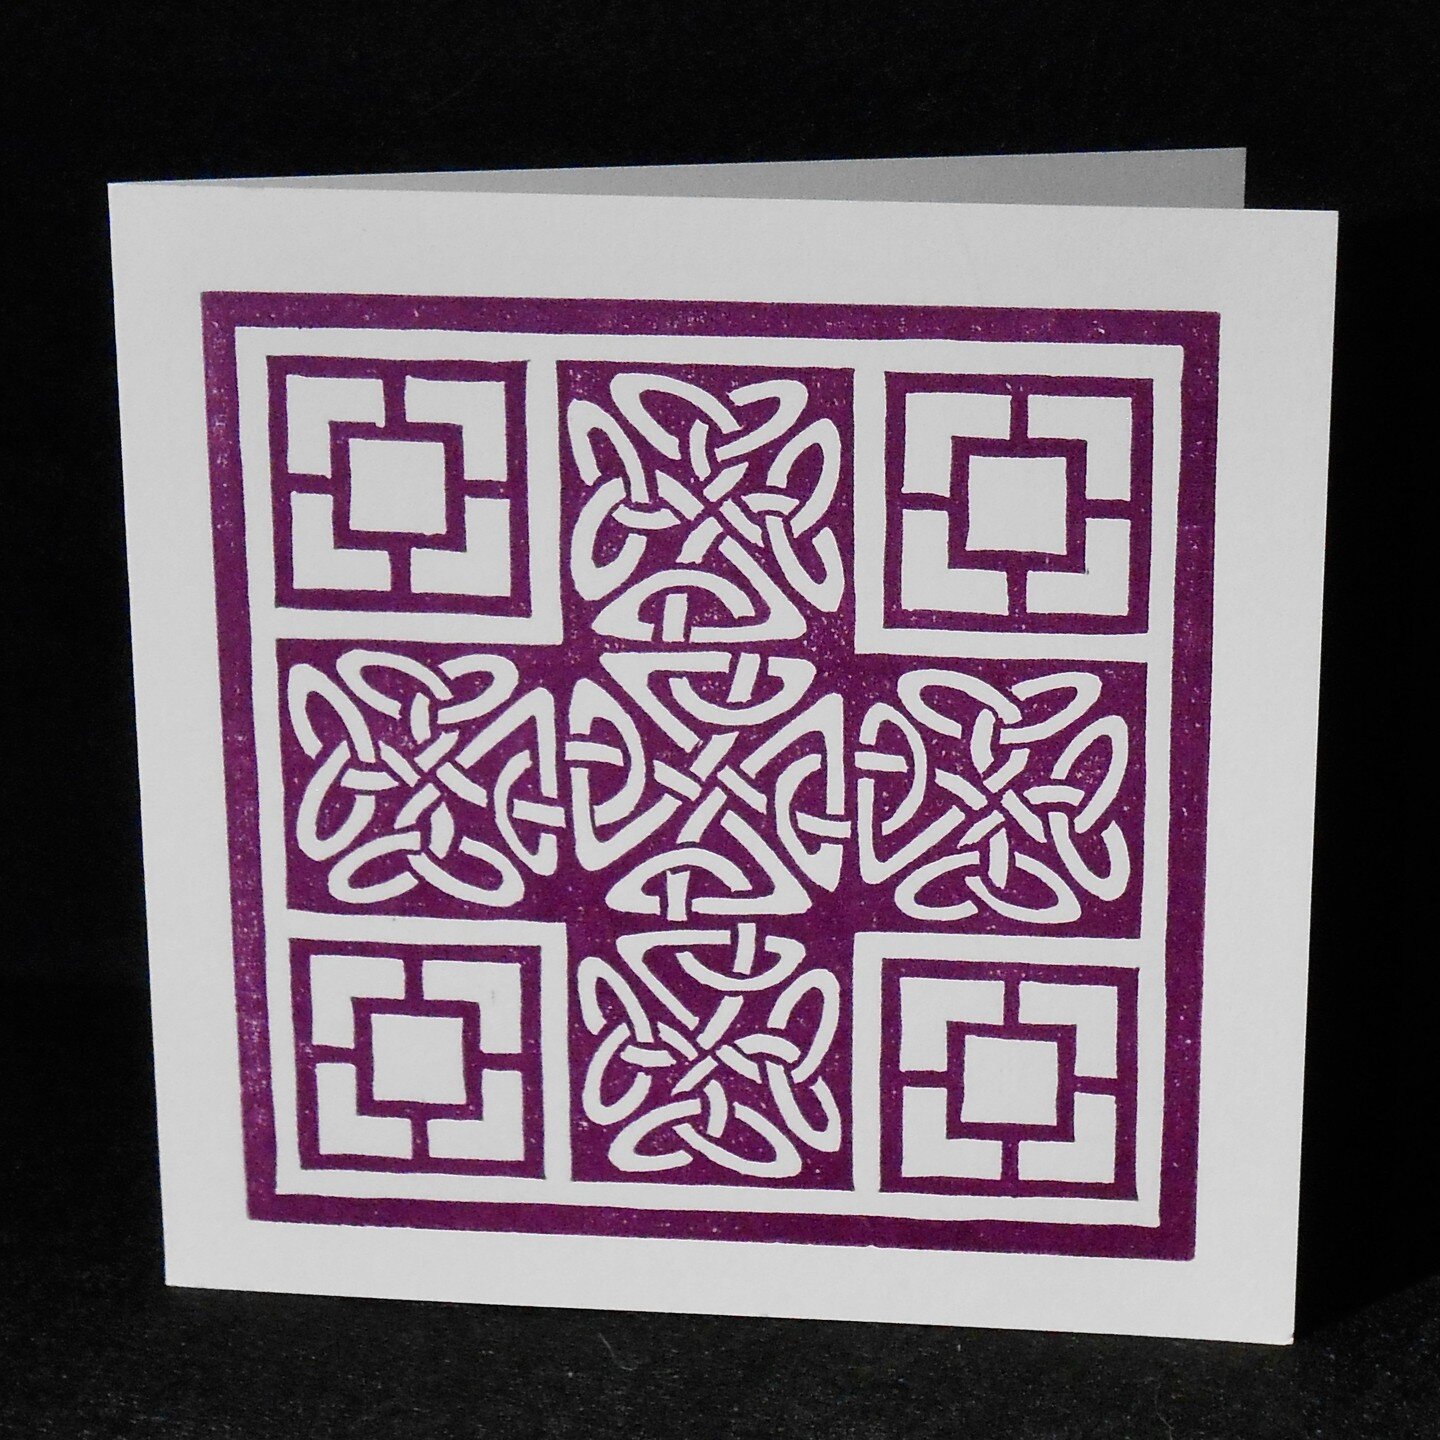 Last week I printed the first batch of my latest hand printed, linocut Celtic card design and this week it is available on my Etsy shop
https://www.etsy.com/uk/shop/IanOHalloranArtist
I've called it 'The Caithness Cross' it is printed in @artshophove